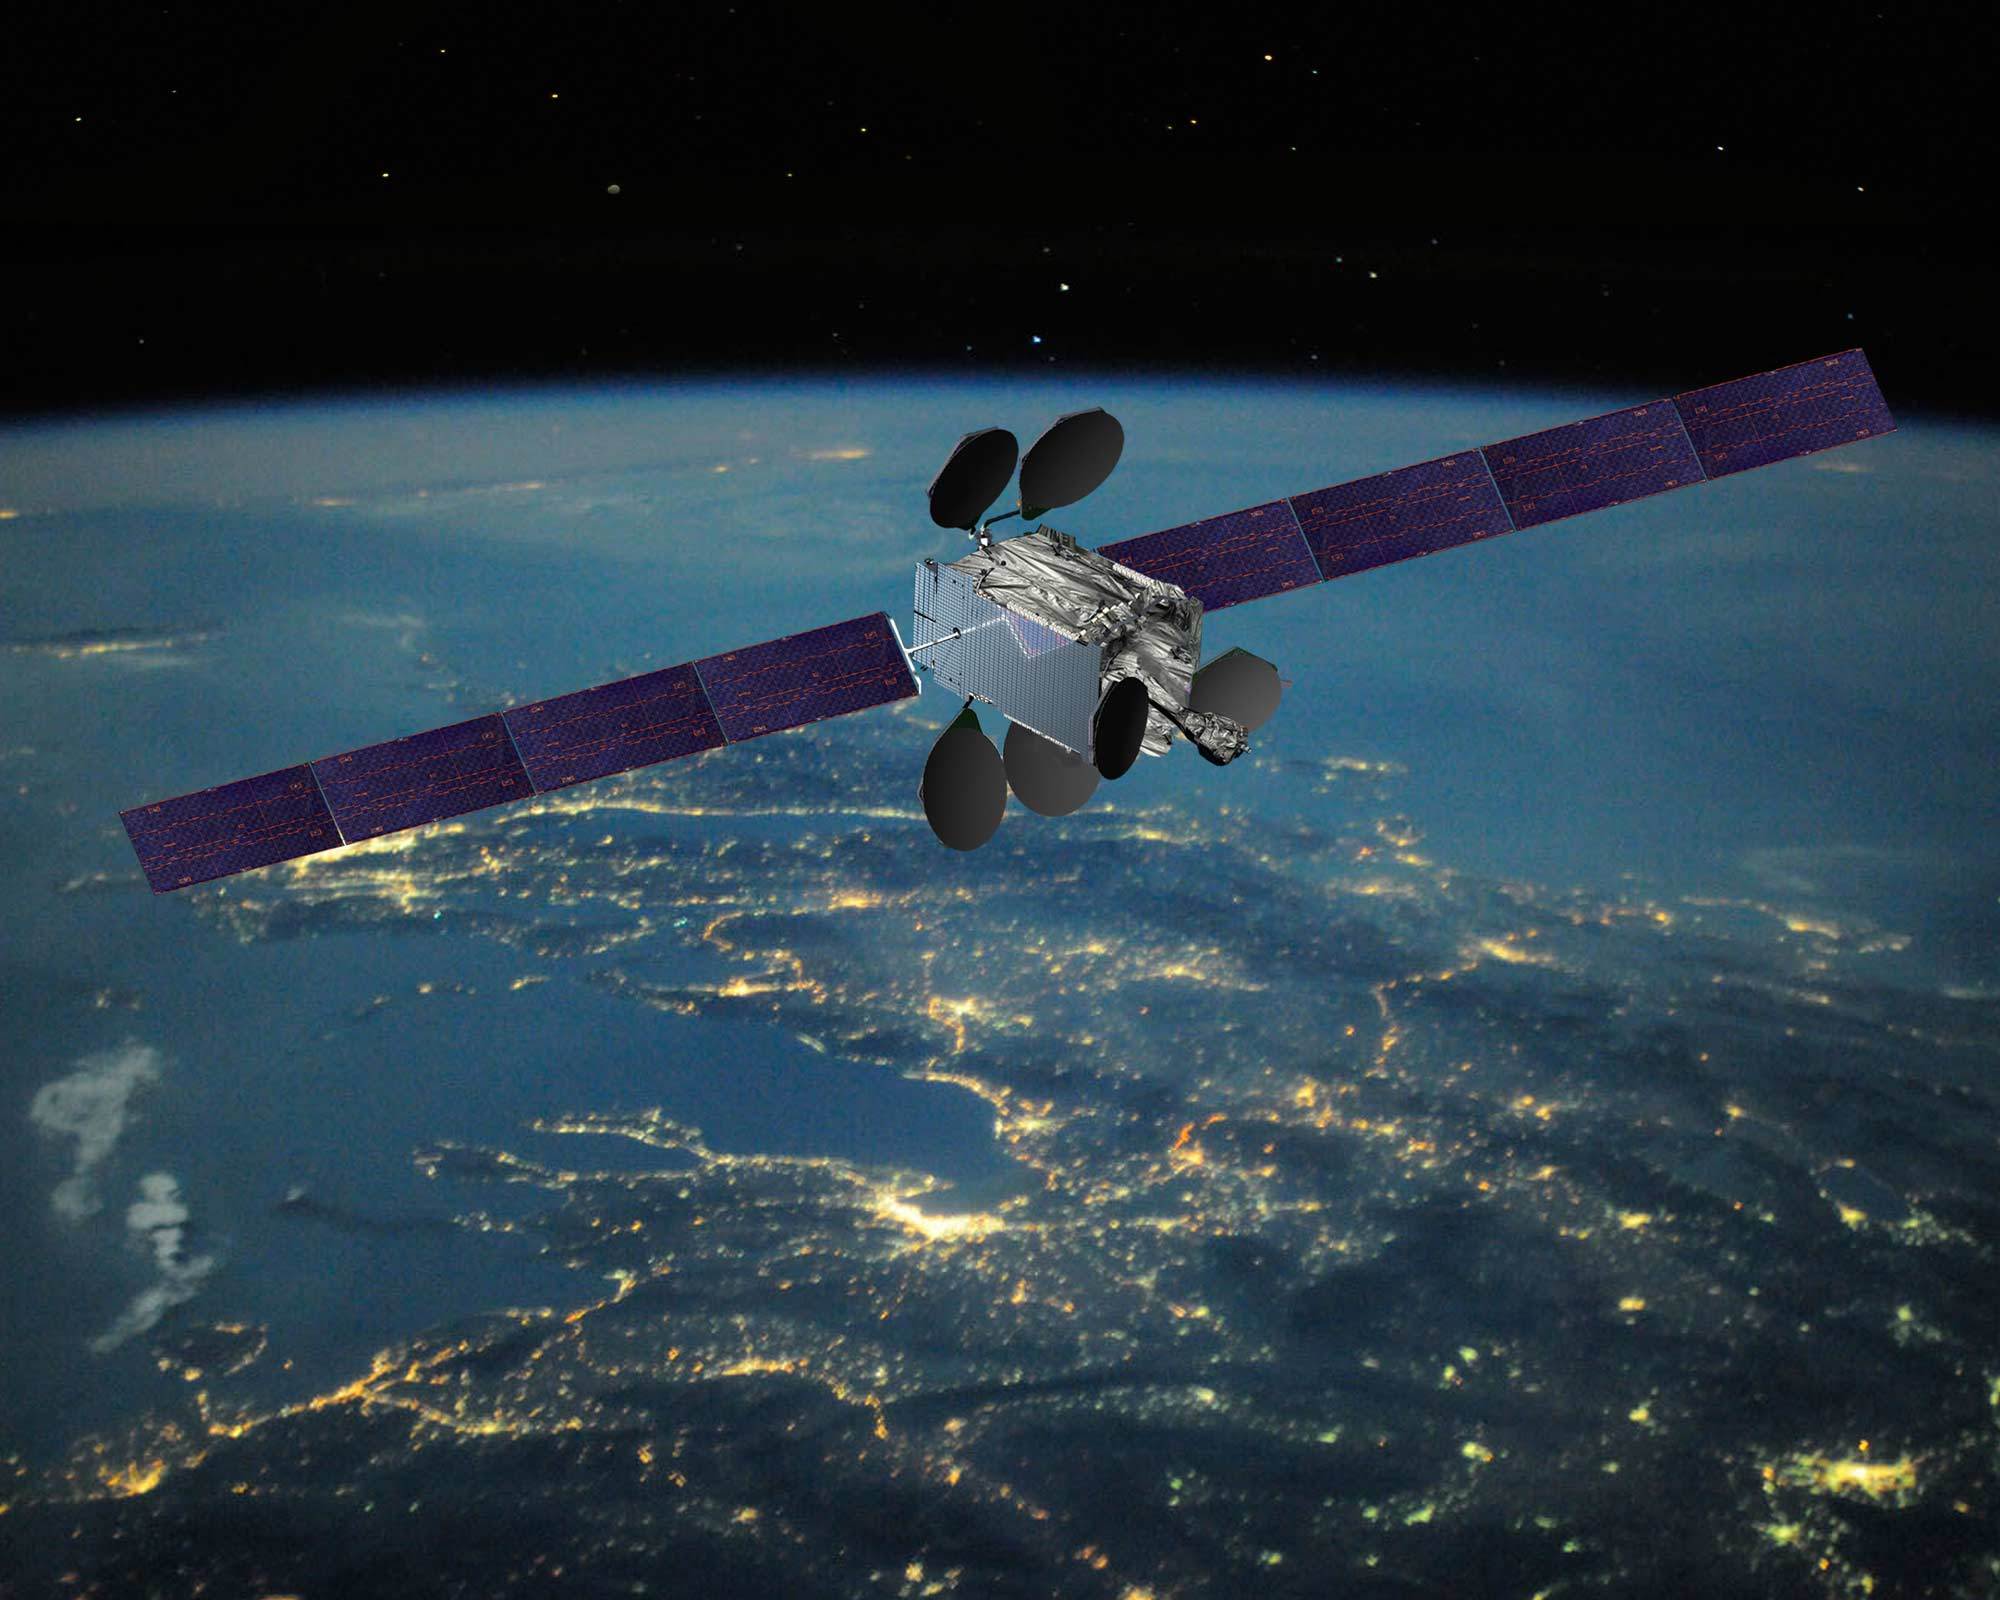 Intelsat satellite in service after overcoming engine trouble – Spaceflight Now